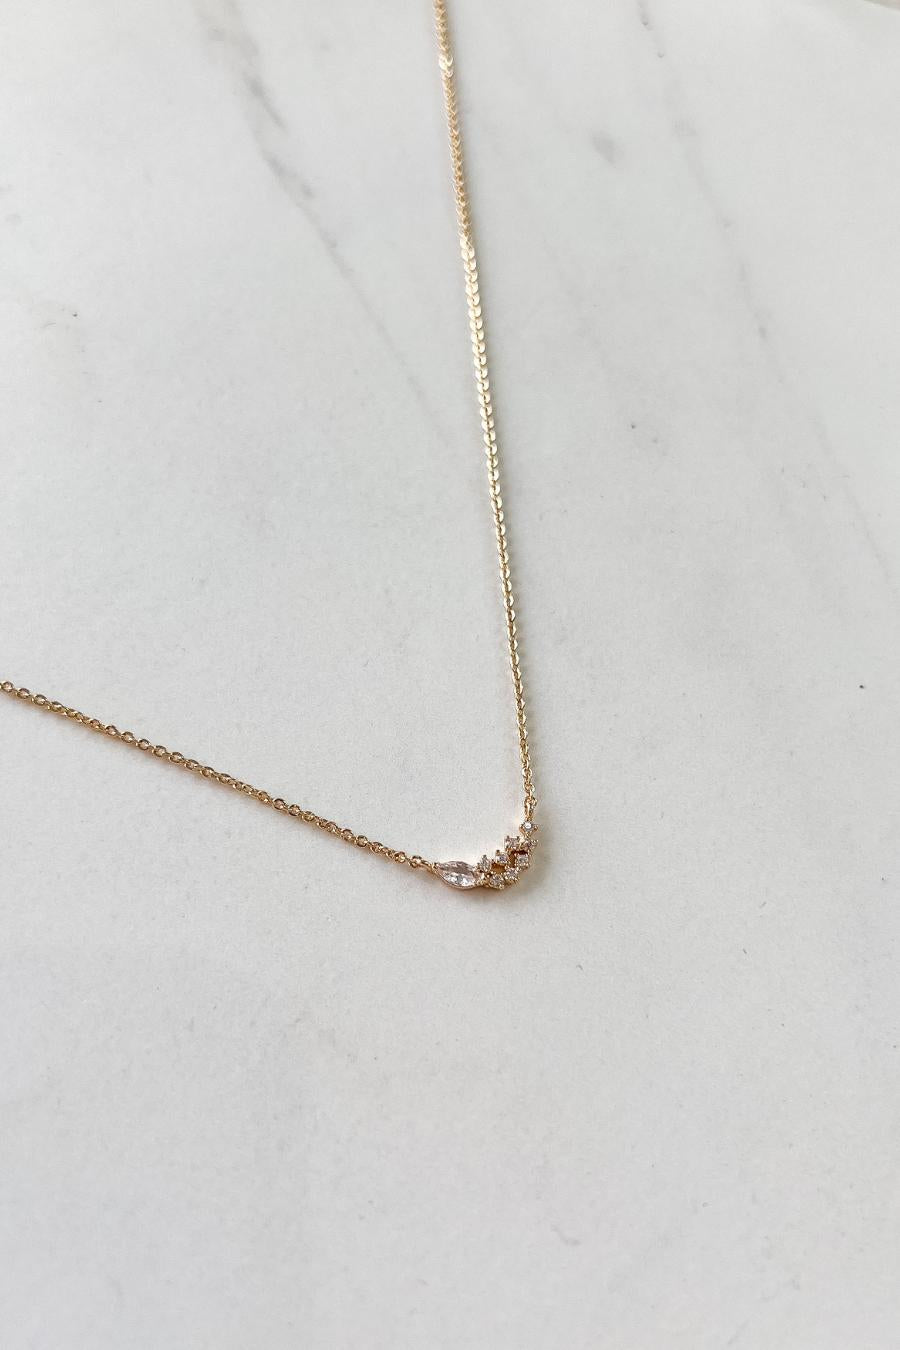 Gold Dainty Necklace with Stones